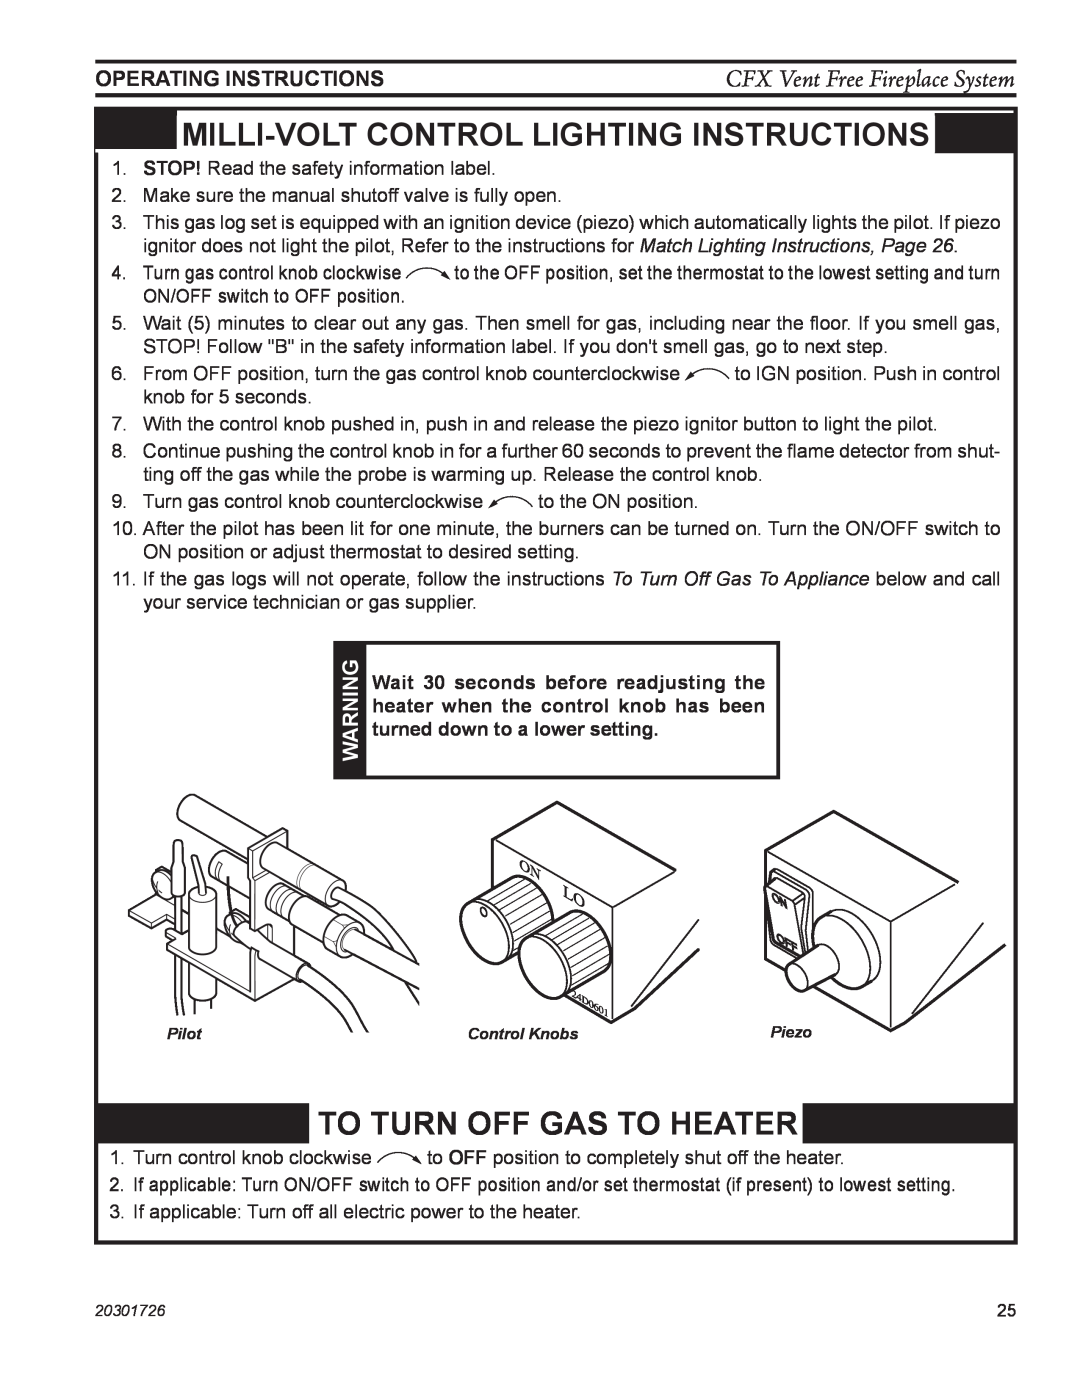 Monessen Hearth CFX32, CFX24 Milli-Voltcontrol Lighting Instructions, To Turn Off Gas To Heater, Operating Instructions 